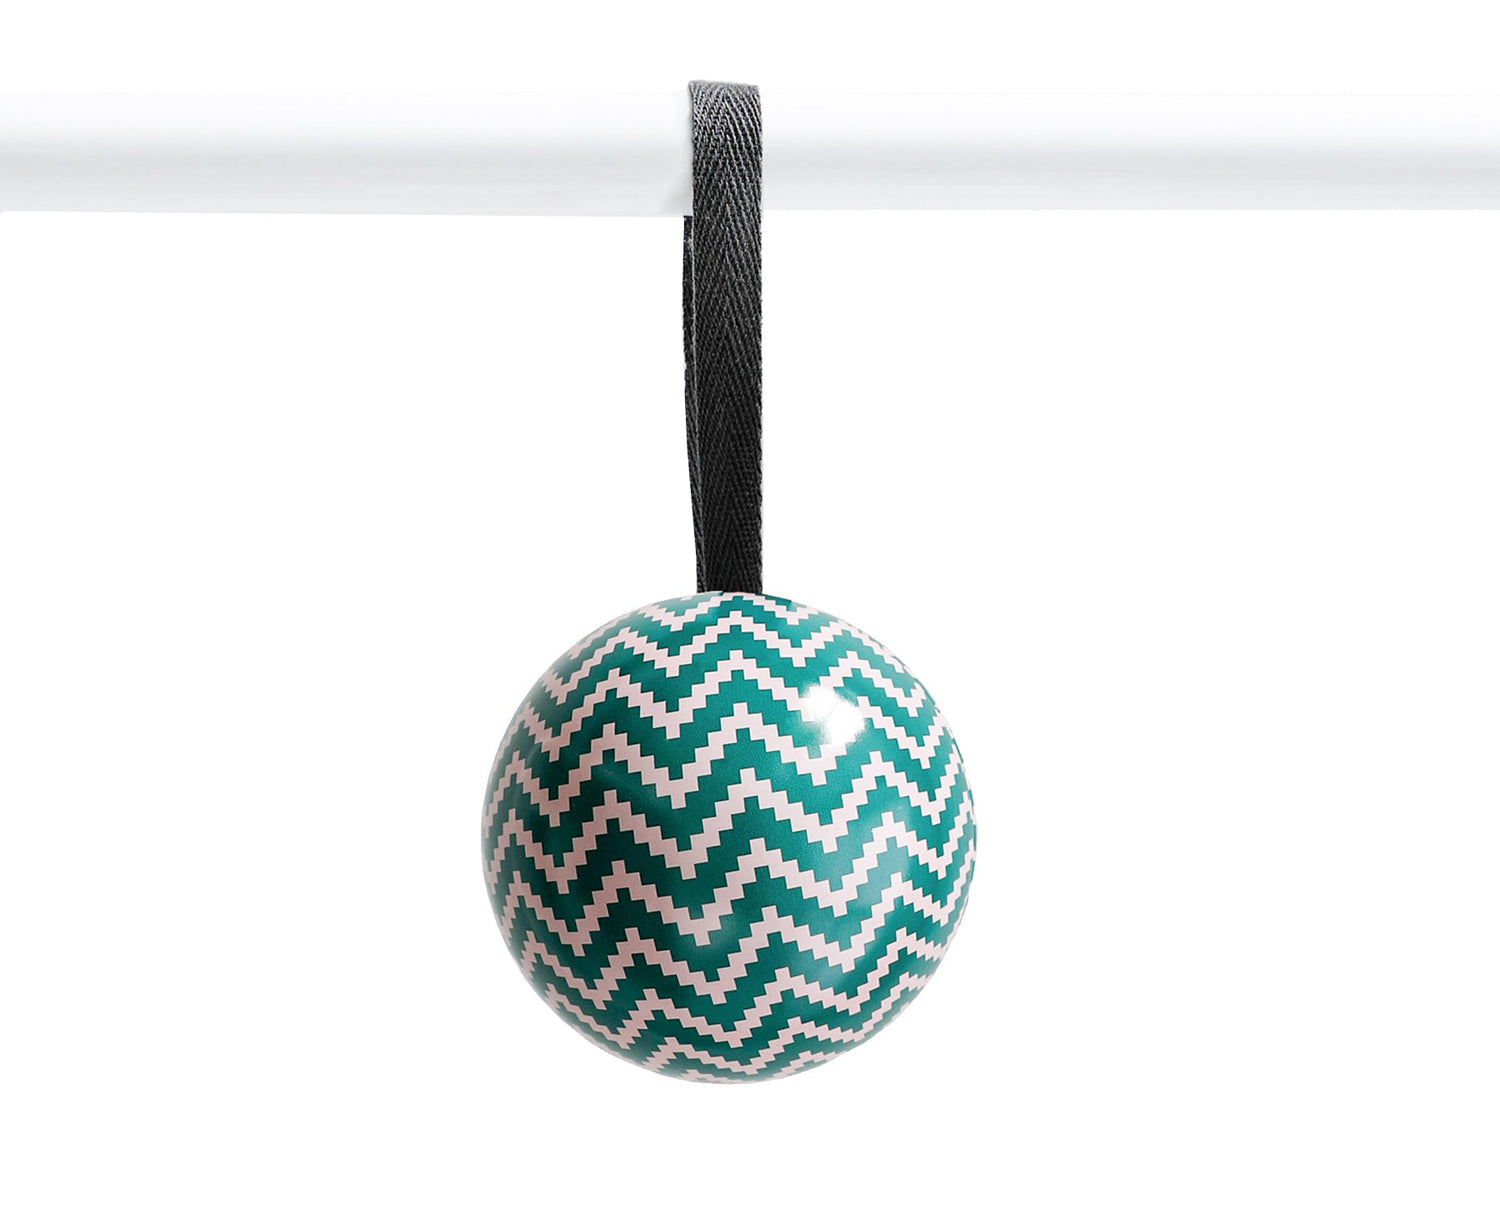 Tin Bauble - Green and White Zig Zag - by Father Rabbit